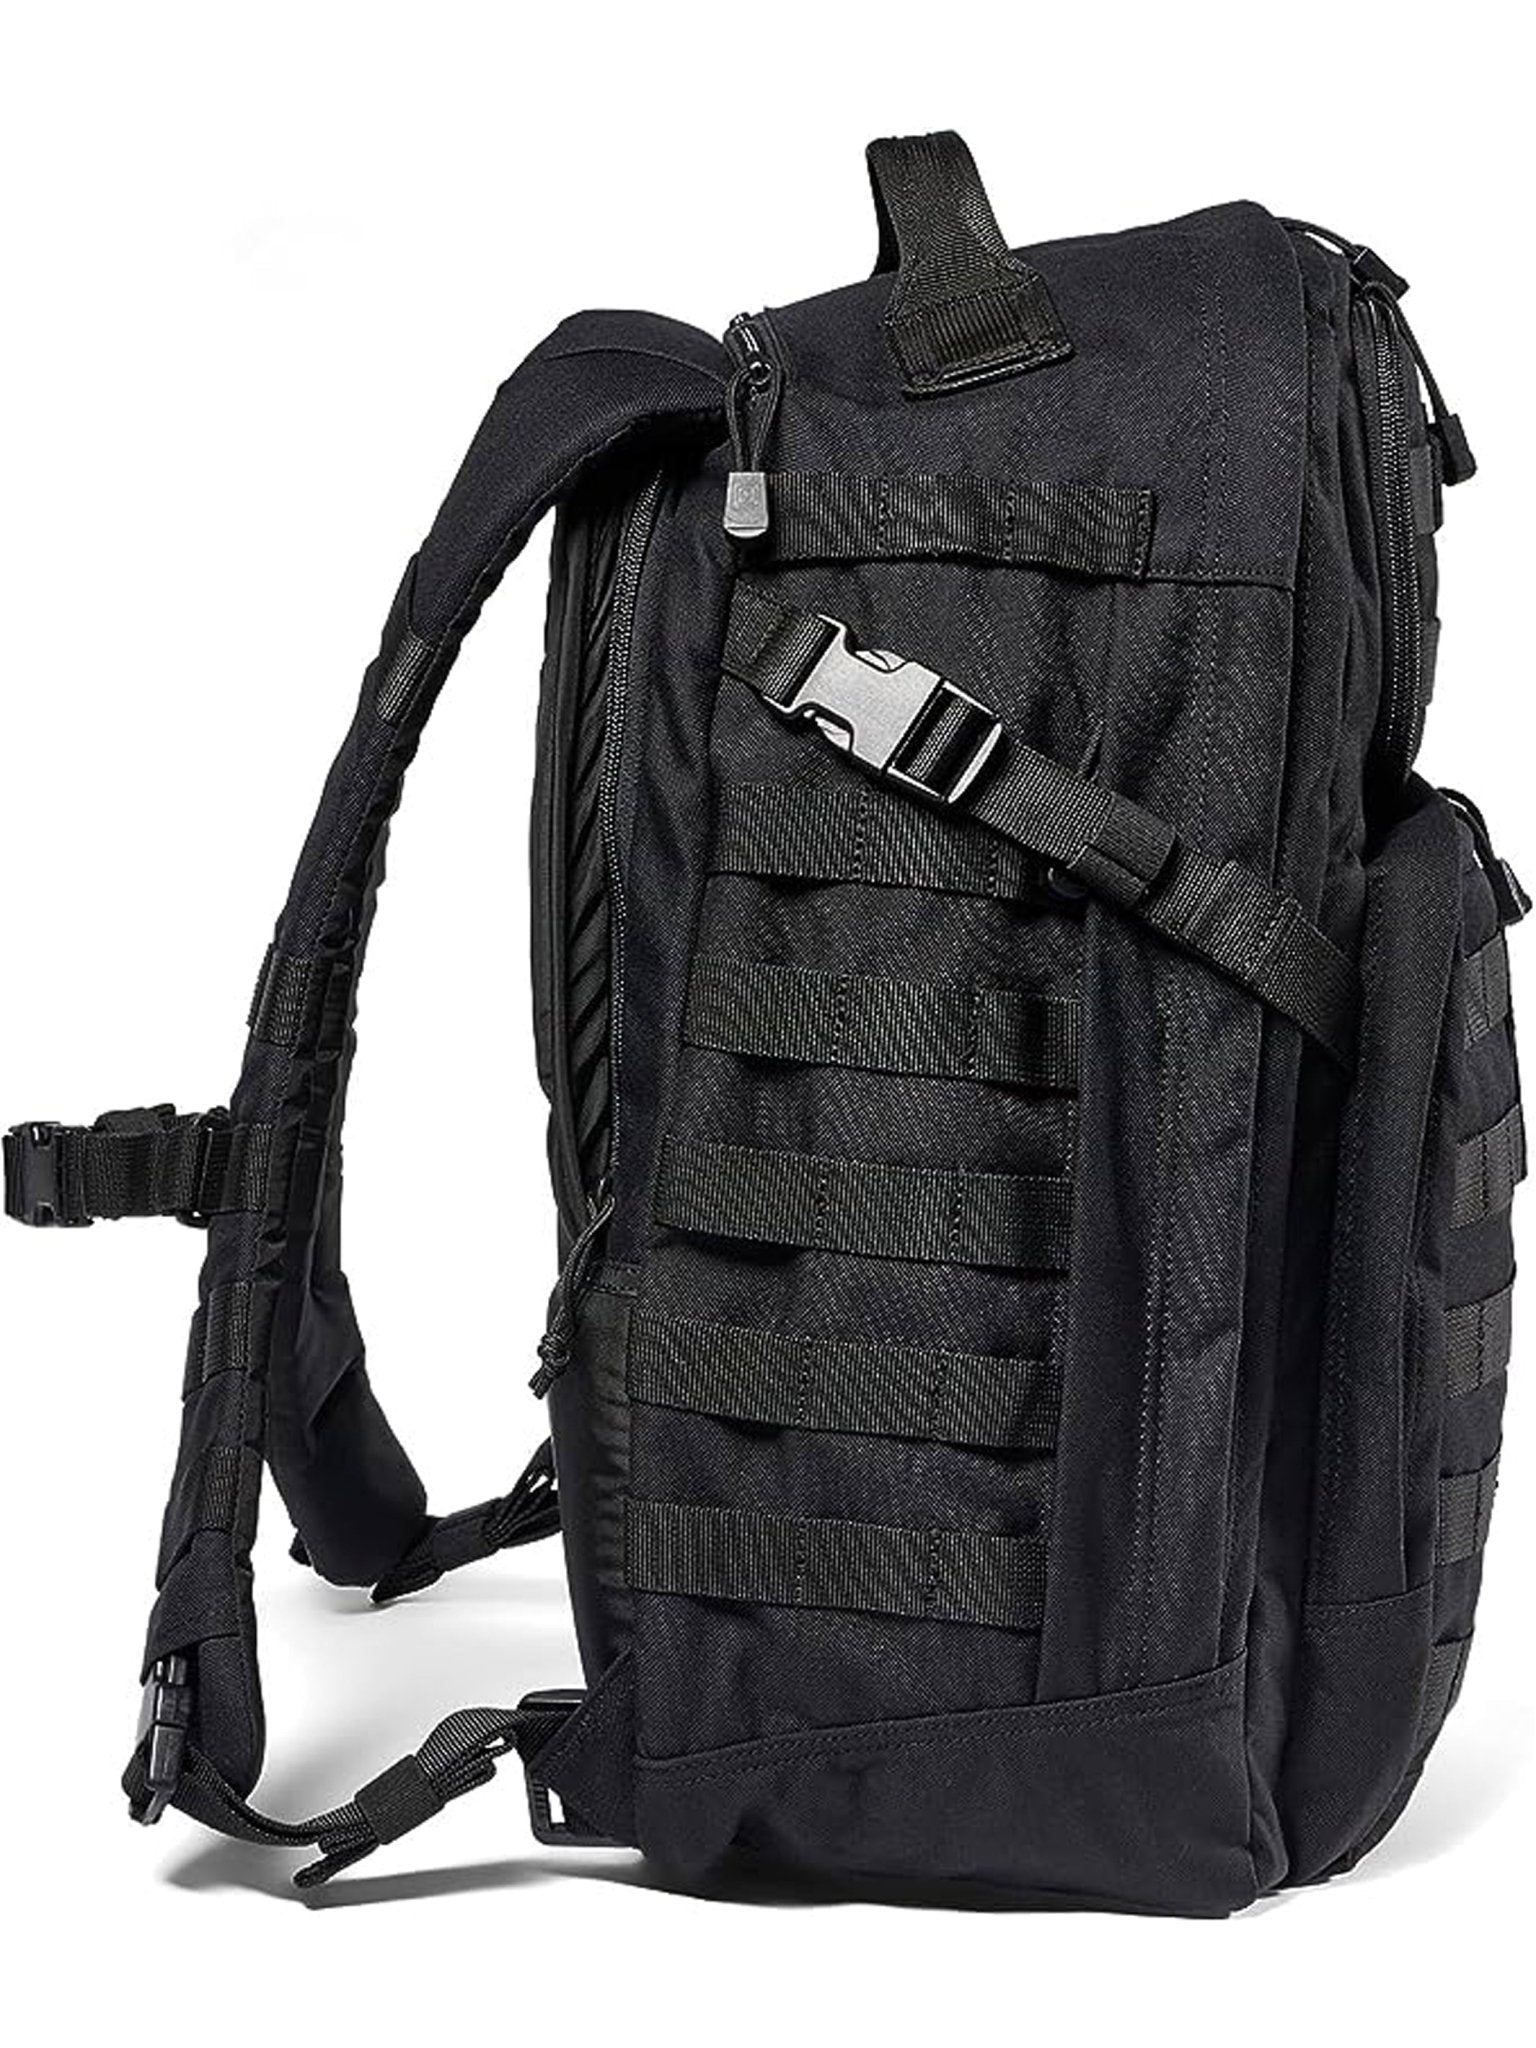 4elementsclothing5.11 Tactical5.11 Tactical - 5.11 Tactical Rush 24 2.0 Backpack - Style 56563Bag56563-026